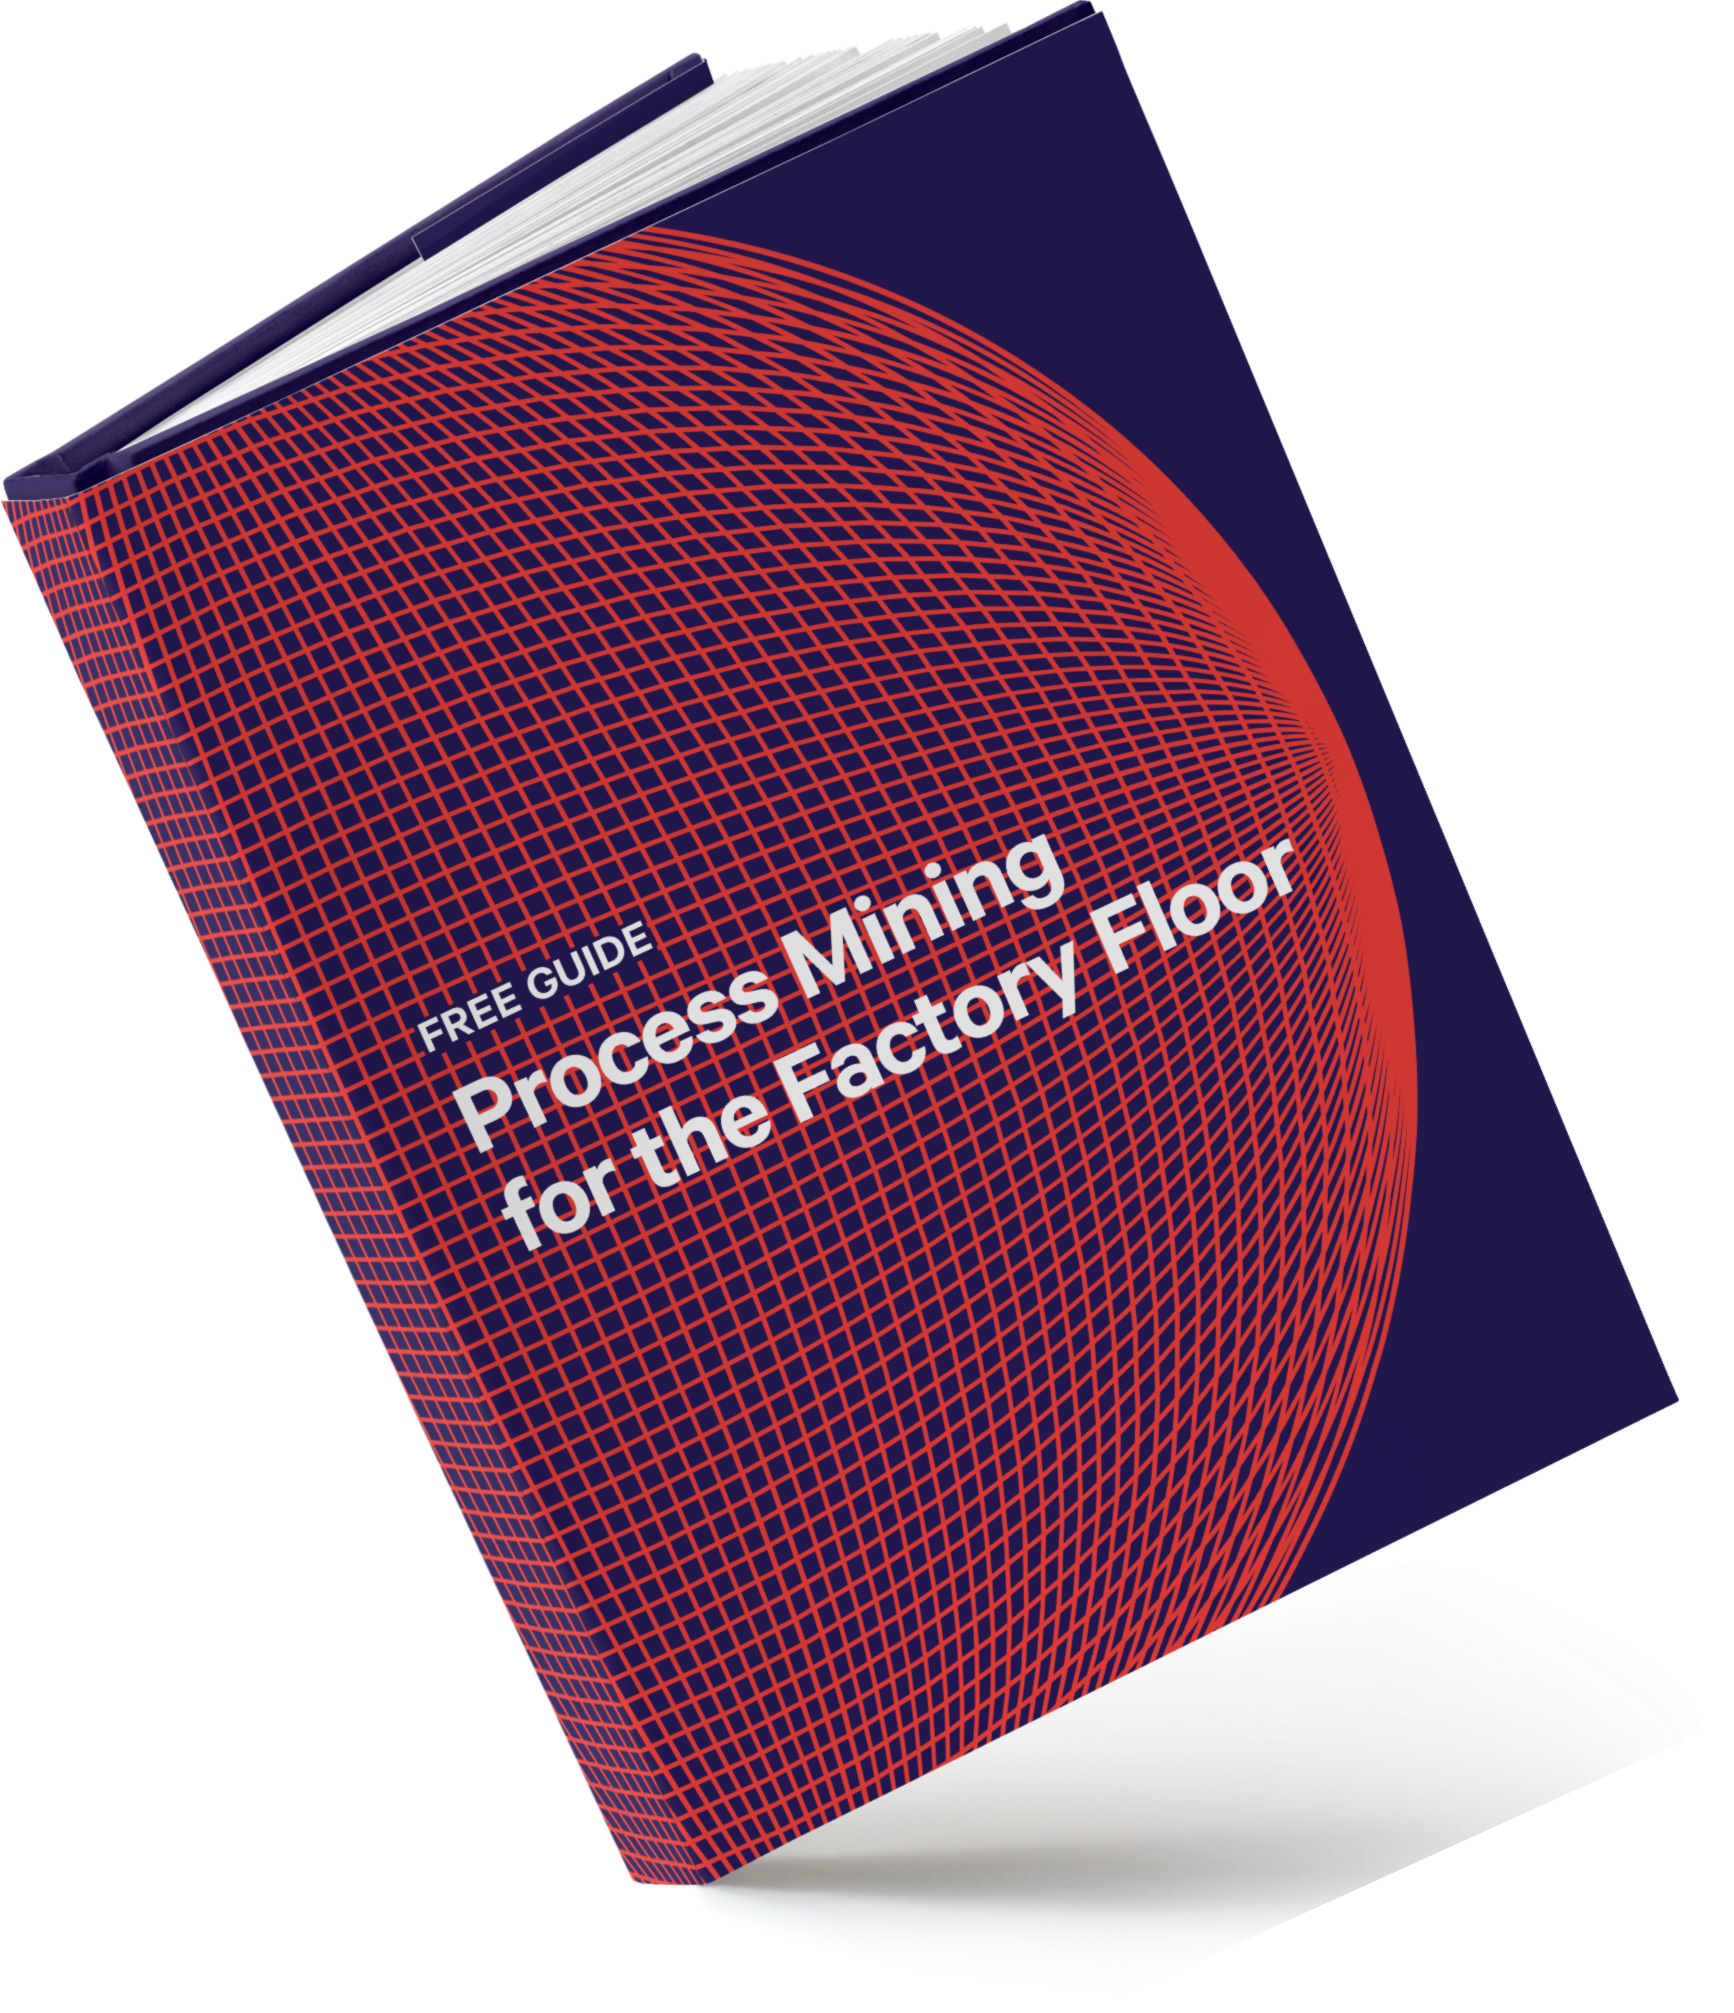 minit-free-guide-process-mining-for-the-factory-floor@3x